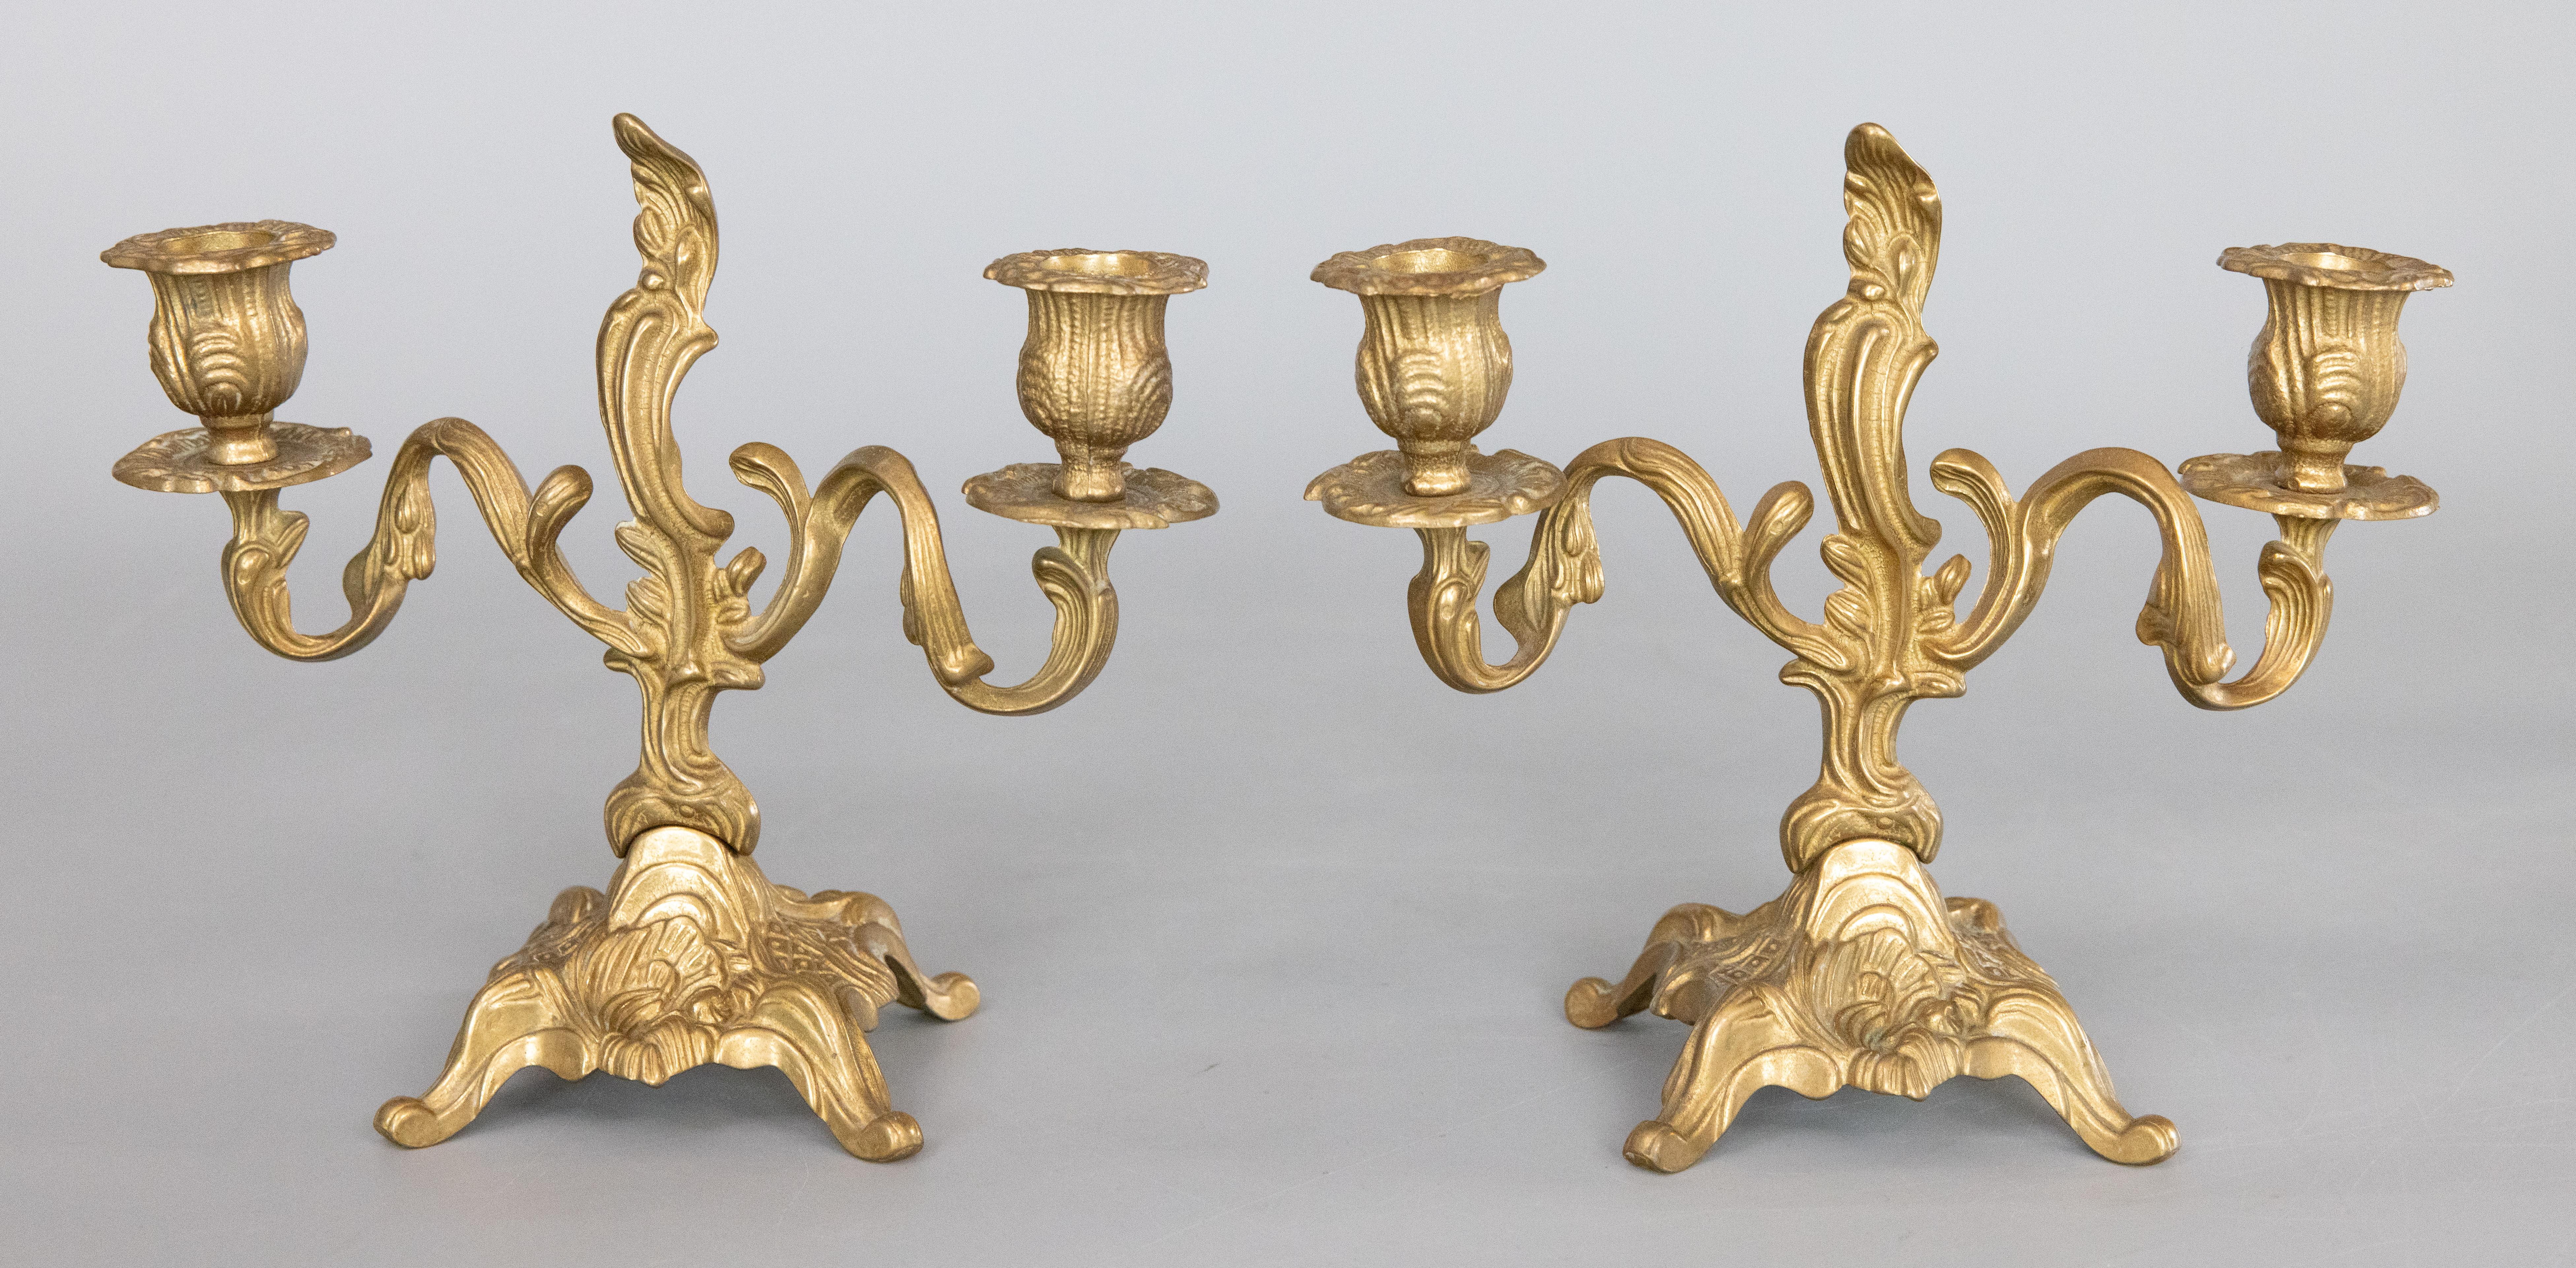 Pair of Italian Rococo Style Gilt Brass Candelabras Candle Holders, circa 1950 For Sale 4